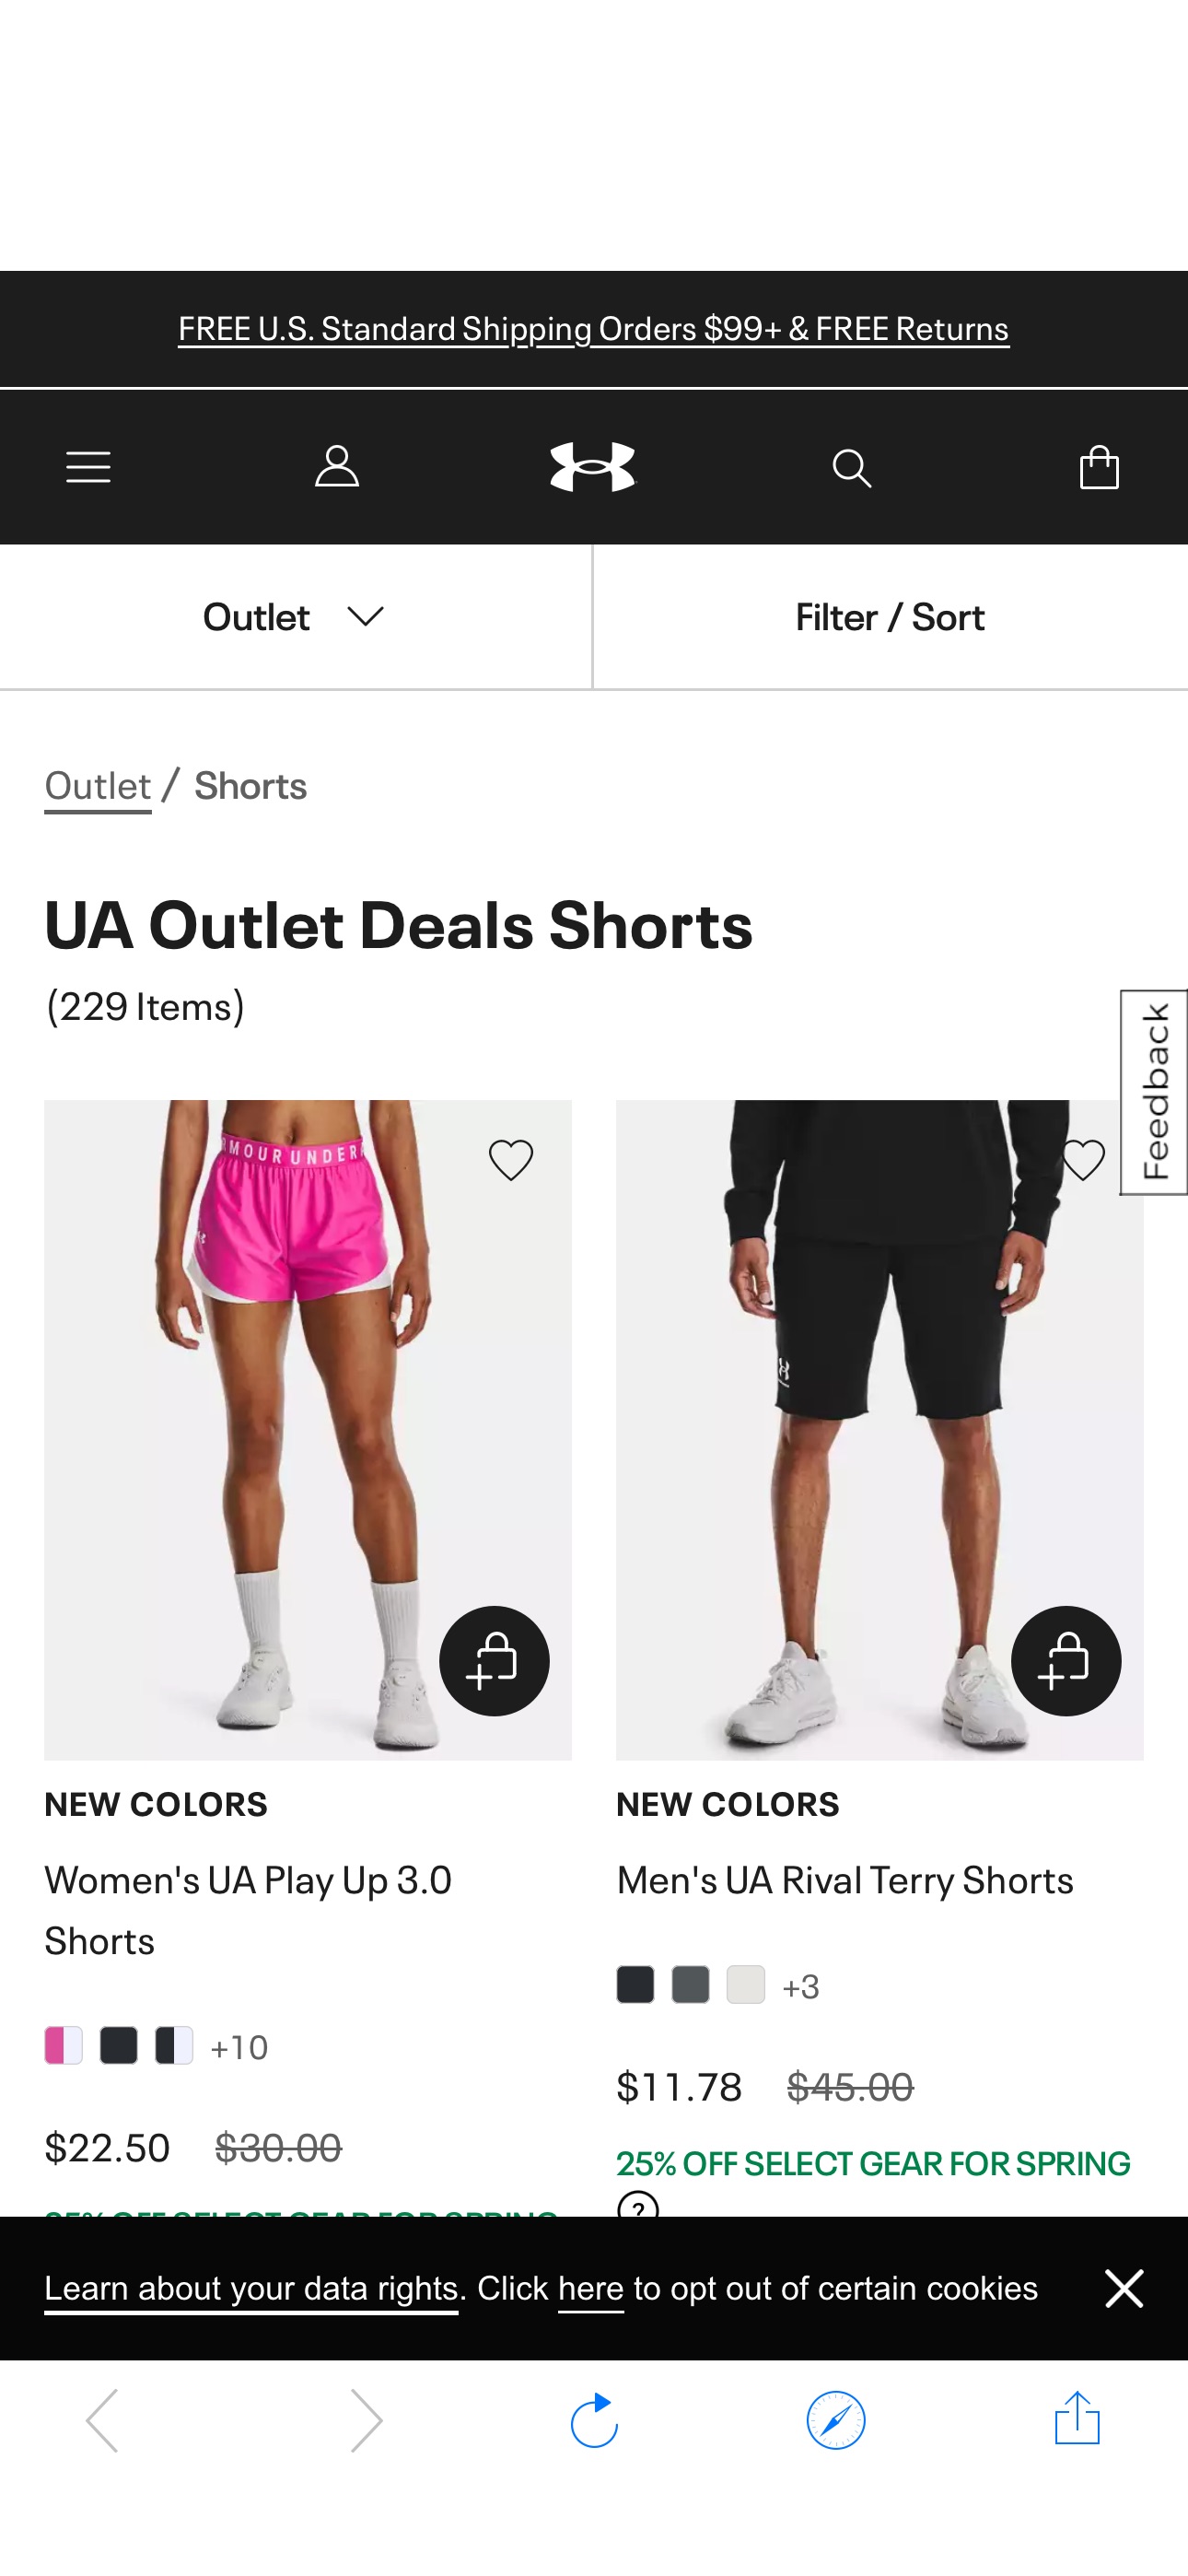 UA Outlet Deals - Shorts | Under Armour Check out this collection of shorts for men and women and get a pair starting at $7 when you add code 30FORYOU at checkout at UnderArmour.com.